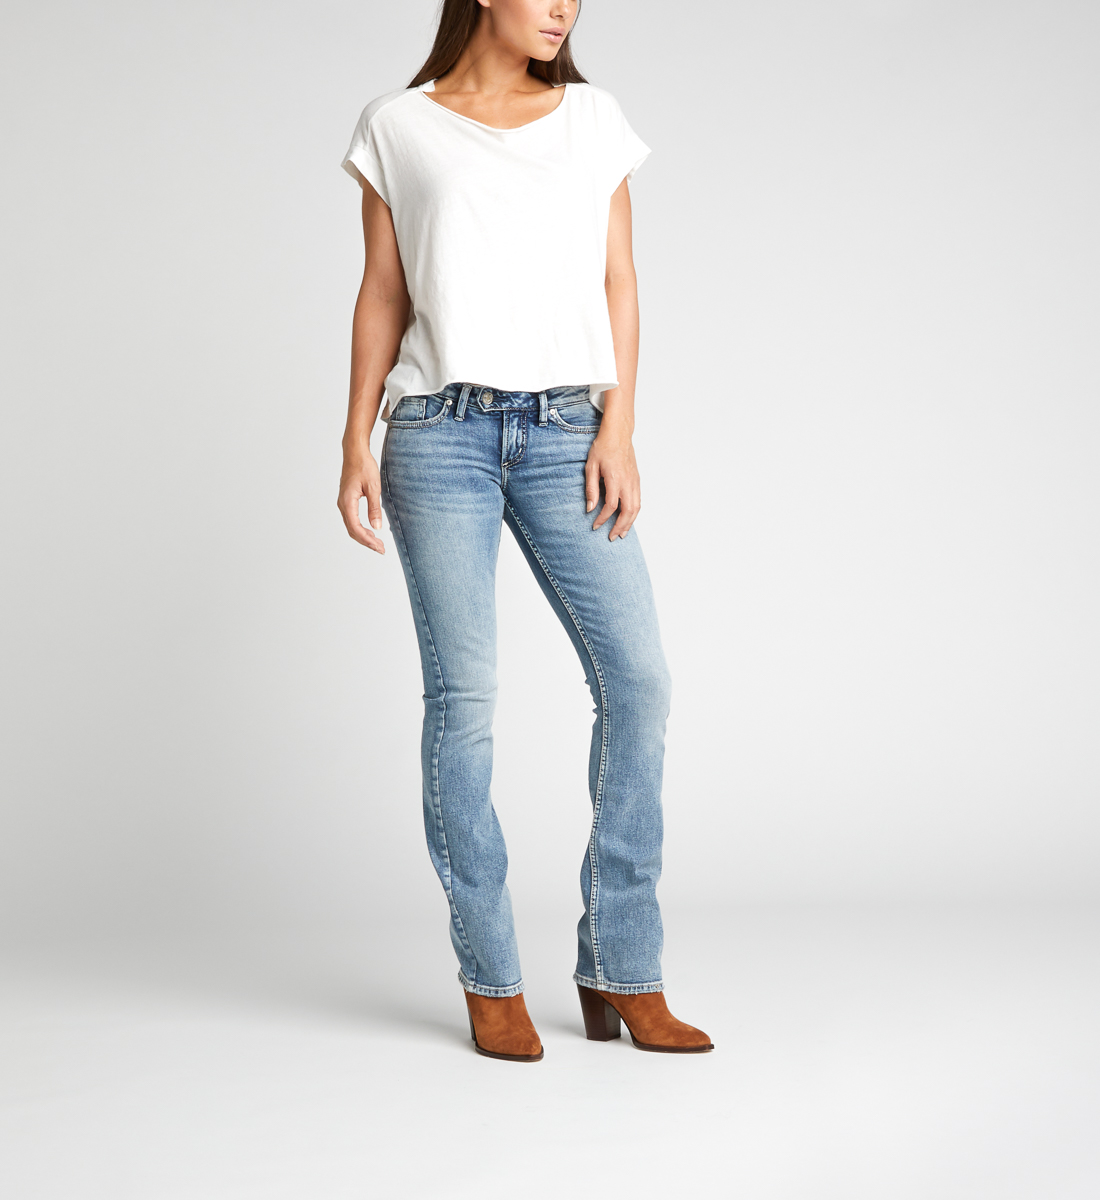 Women's Tuesday Low Rise Slim Bootcut Jeans | Silver Jeans Co.